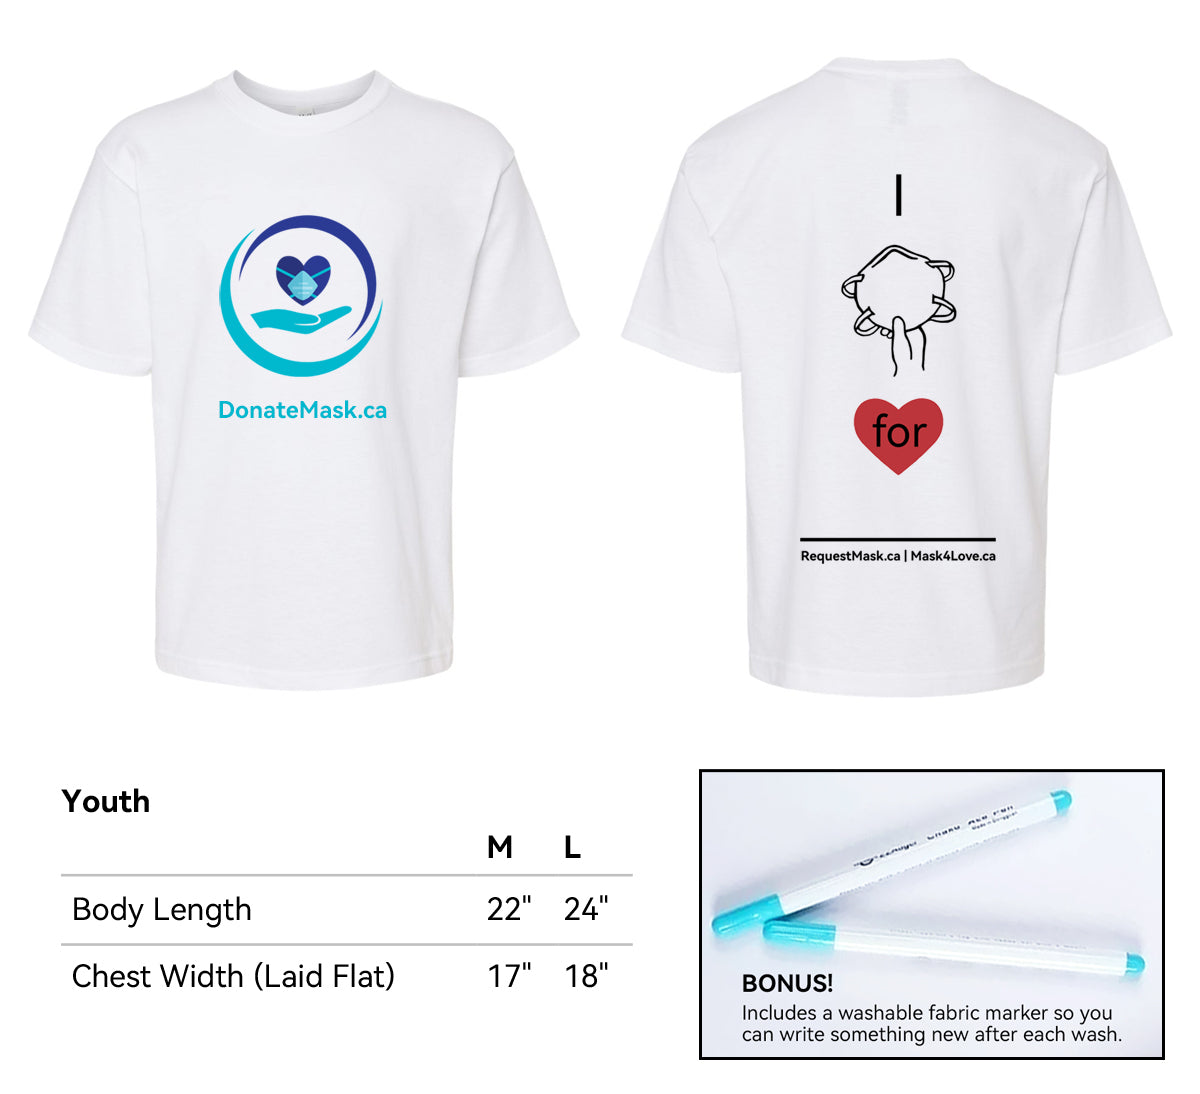 An image of the front and the back of the t-shirt. It's white with the Donate Mask Logo on the front. The lower left has a chart of the measurements of the youth cut sizes. Each measurement is body length and chest width respectively:   Medium is 22 inches, 17 inches; Large is 24 inches, 18 inches. Bottom right corner shows inset picture of fabric markers